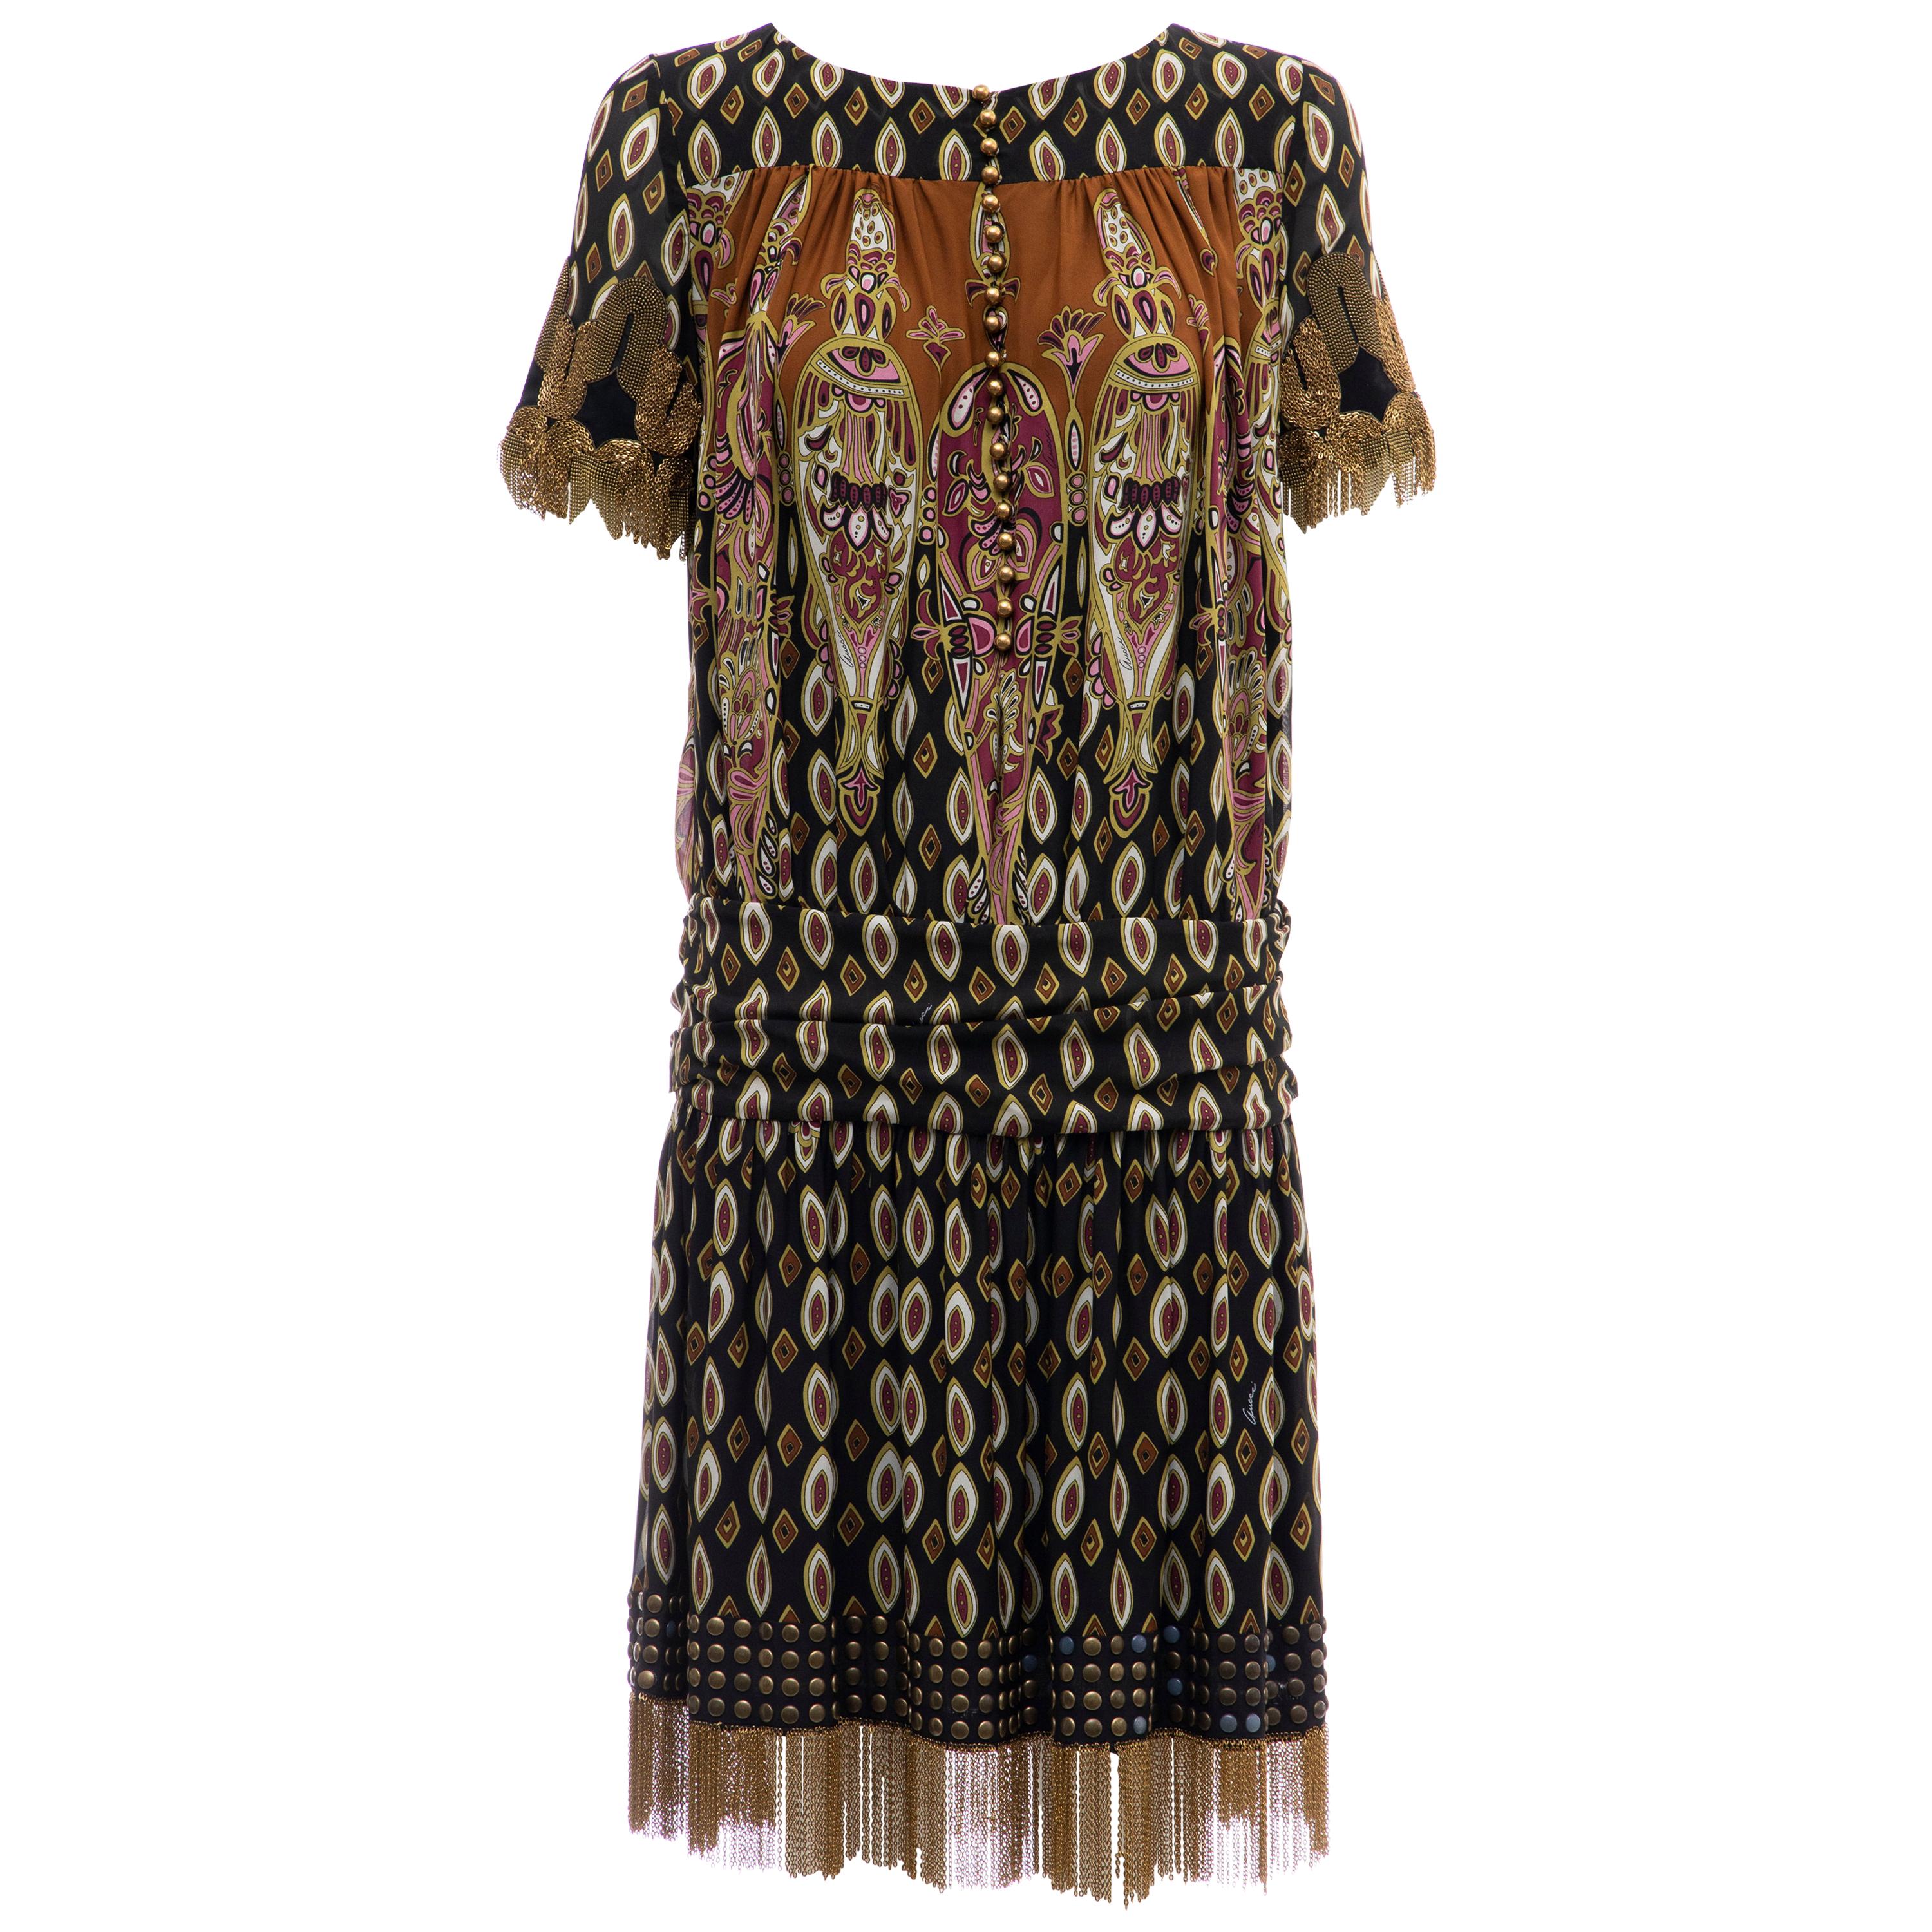 Frida Giannini for Gucci Runway Silk Boteh Pattern Brass Chains Dress, Fall 2008 For Sale